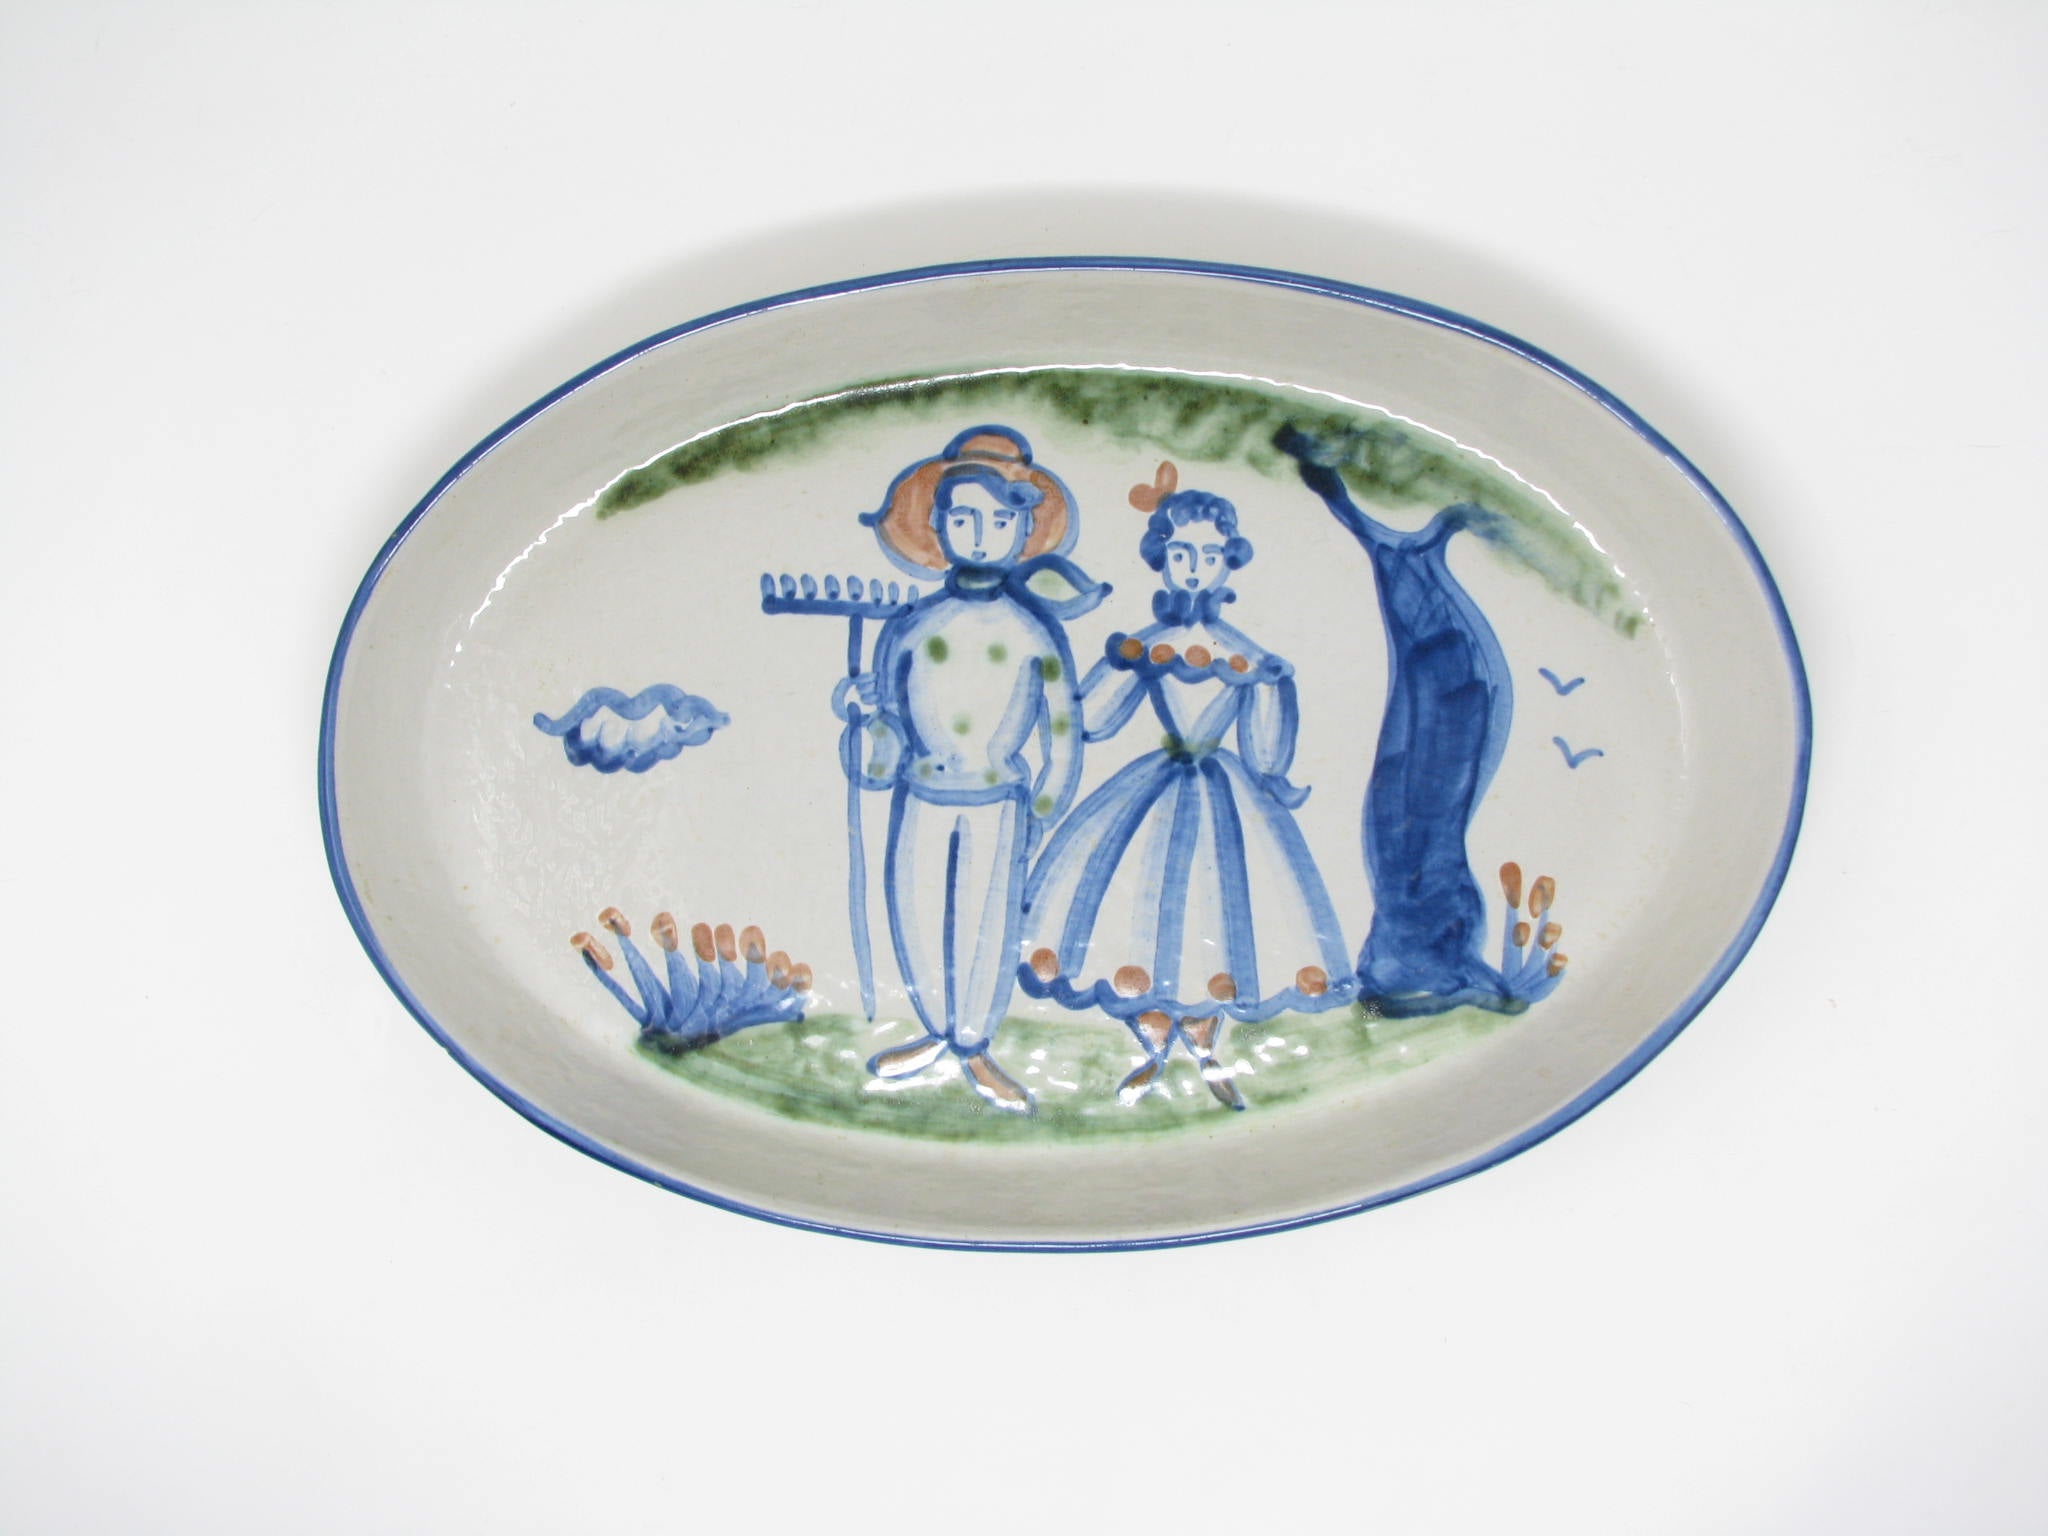 edgebrookhouse - Vintage MA Hadley Pottery Country Oval Baking Dish or Platter with Farmer and Wife